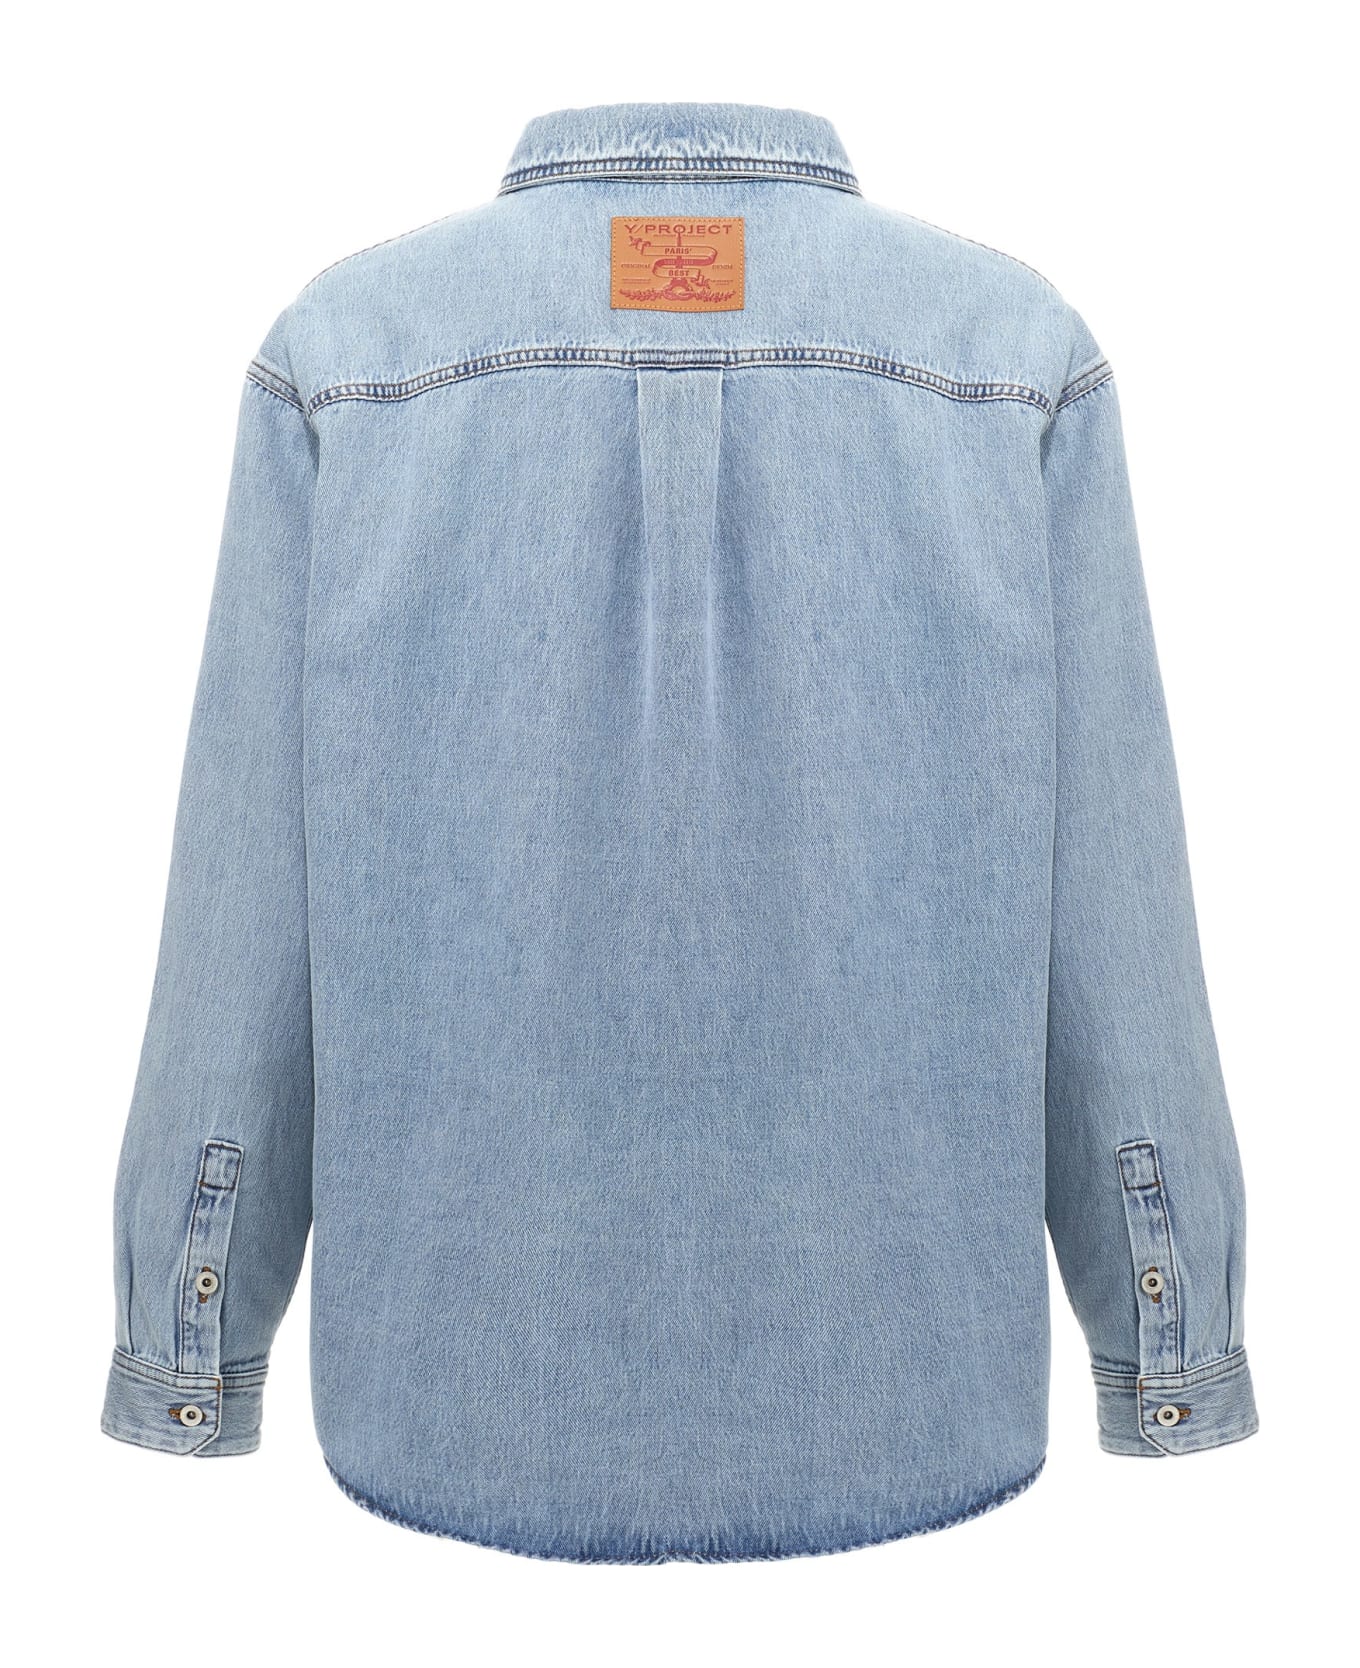 Y/Project 'hook And Eye' Shirt - Light Blue シャツ